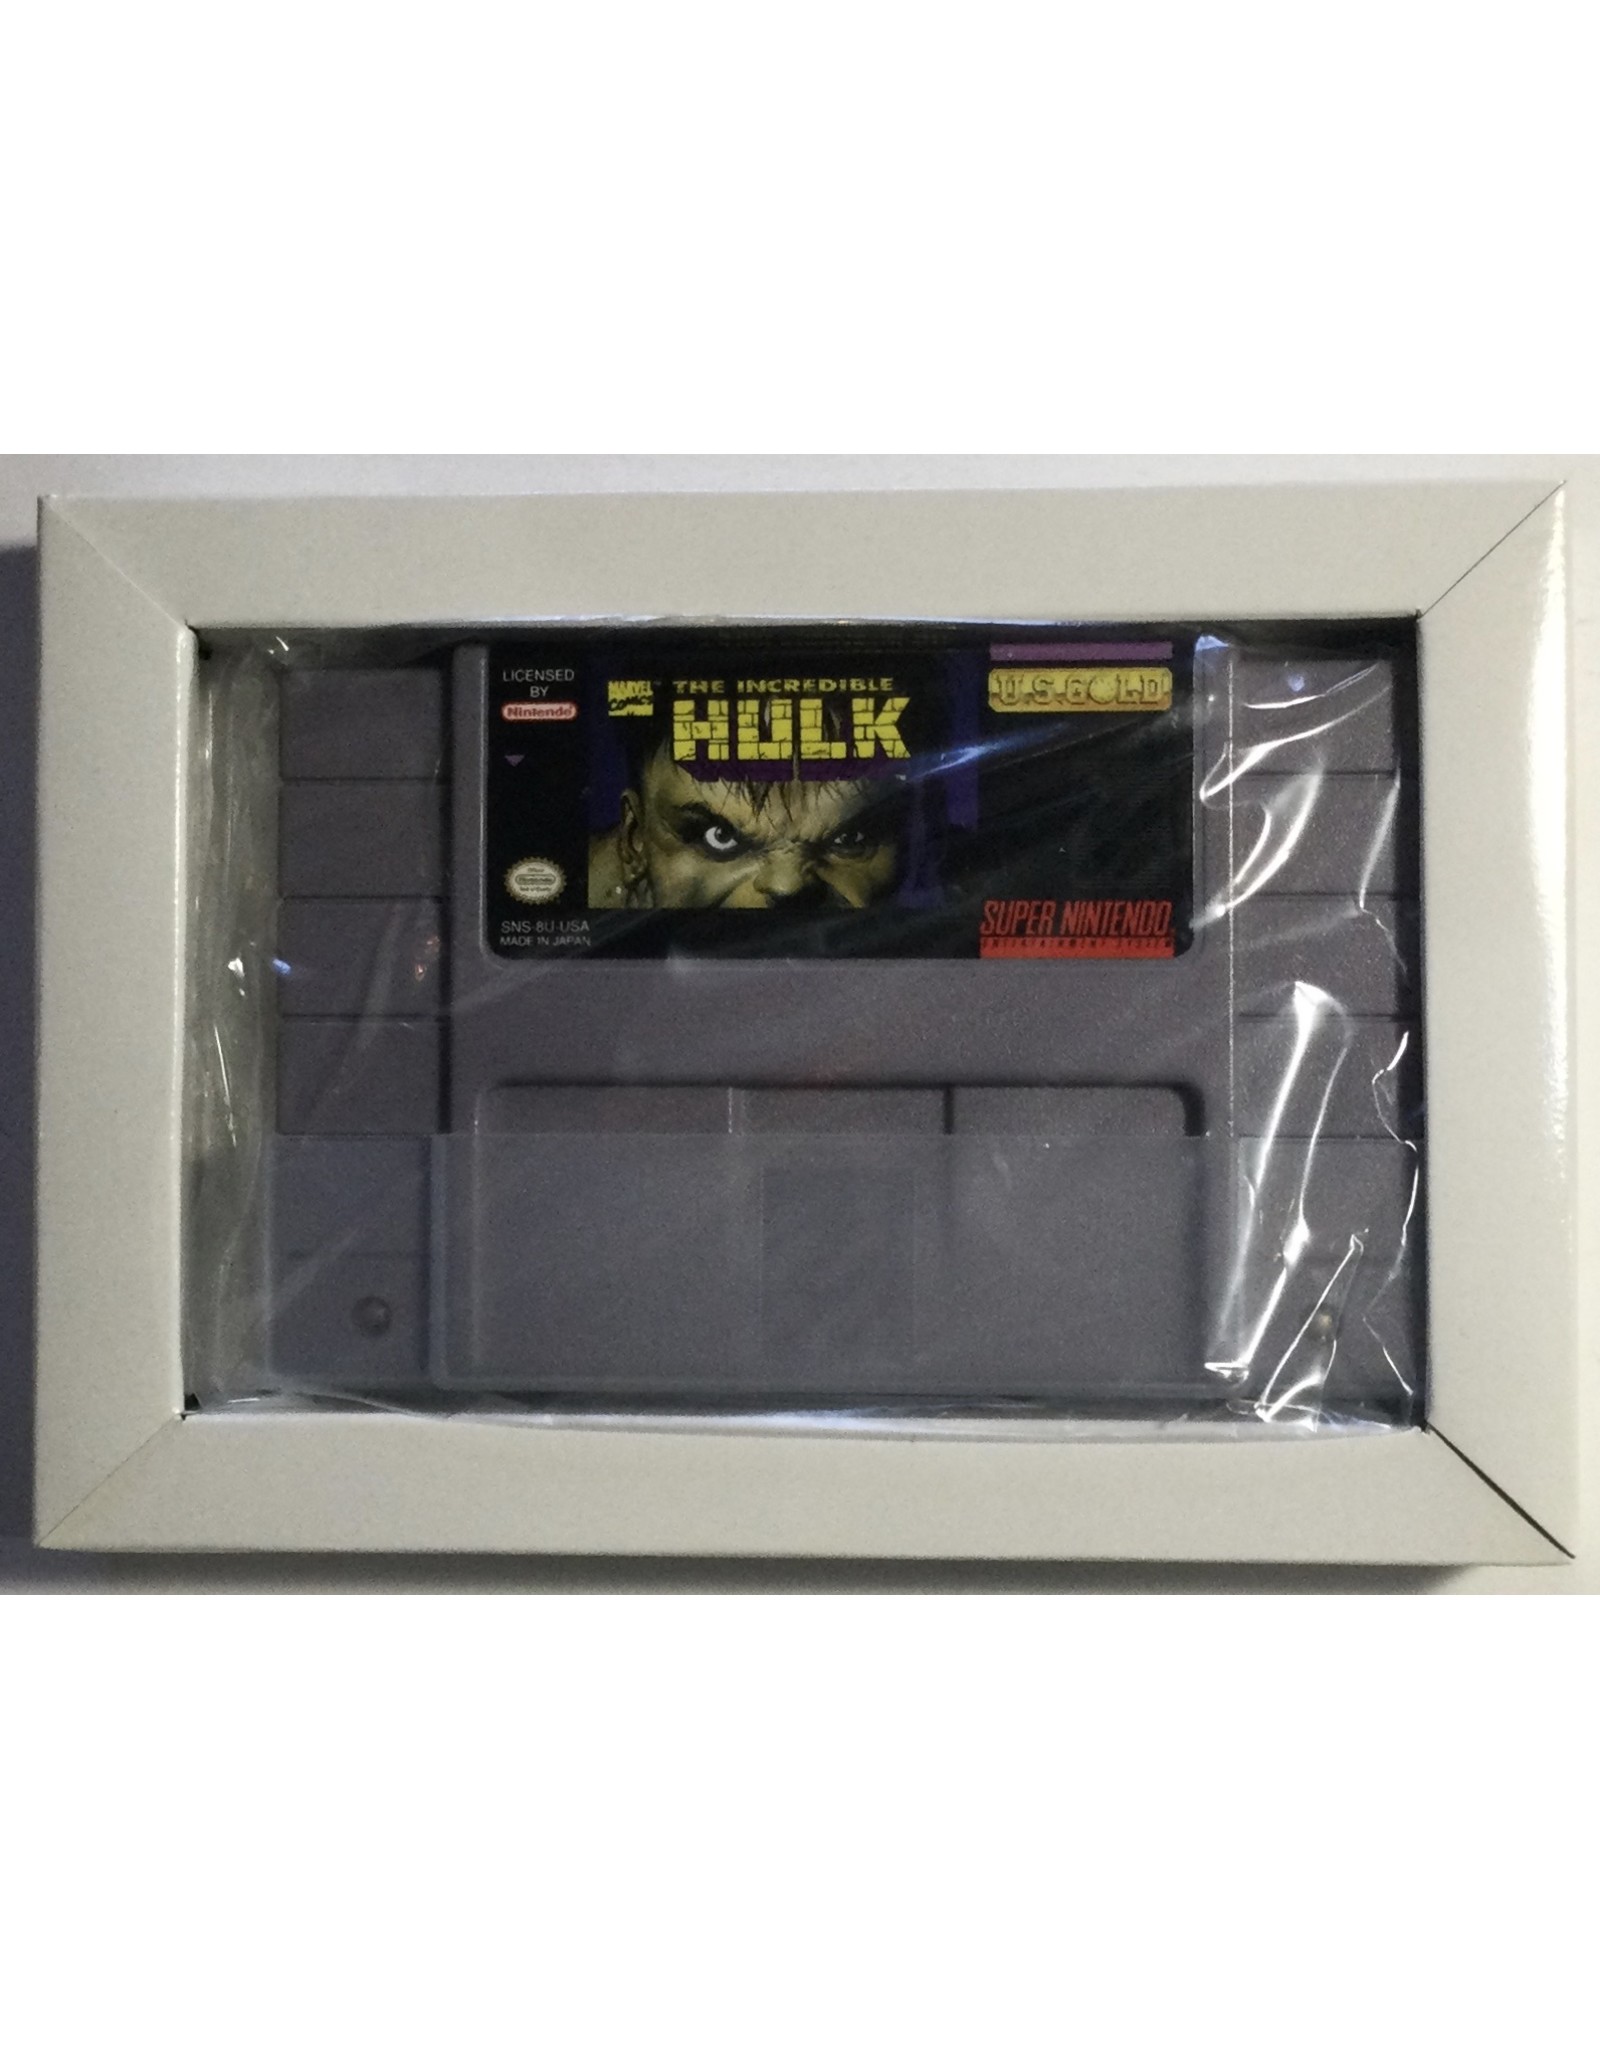 U.S. GOLD The Incredible Hulk for Super Nintendo Entertainment System (SNES)